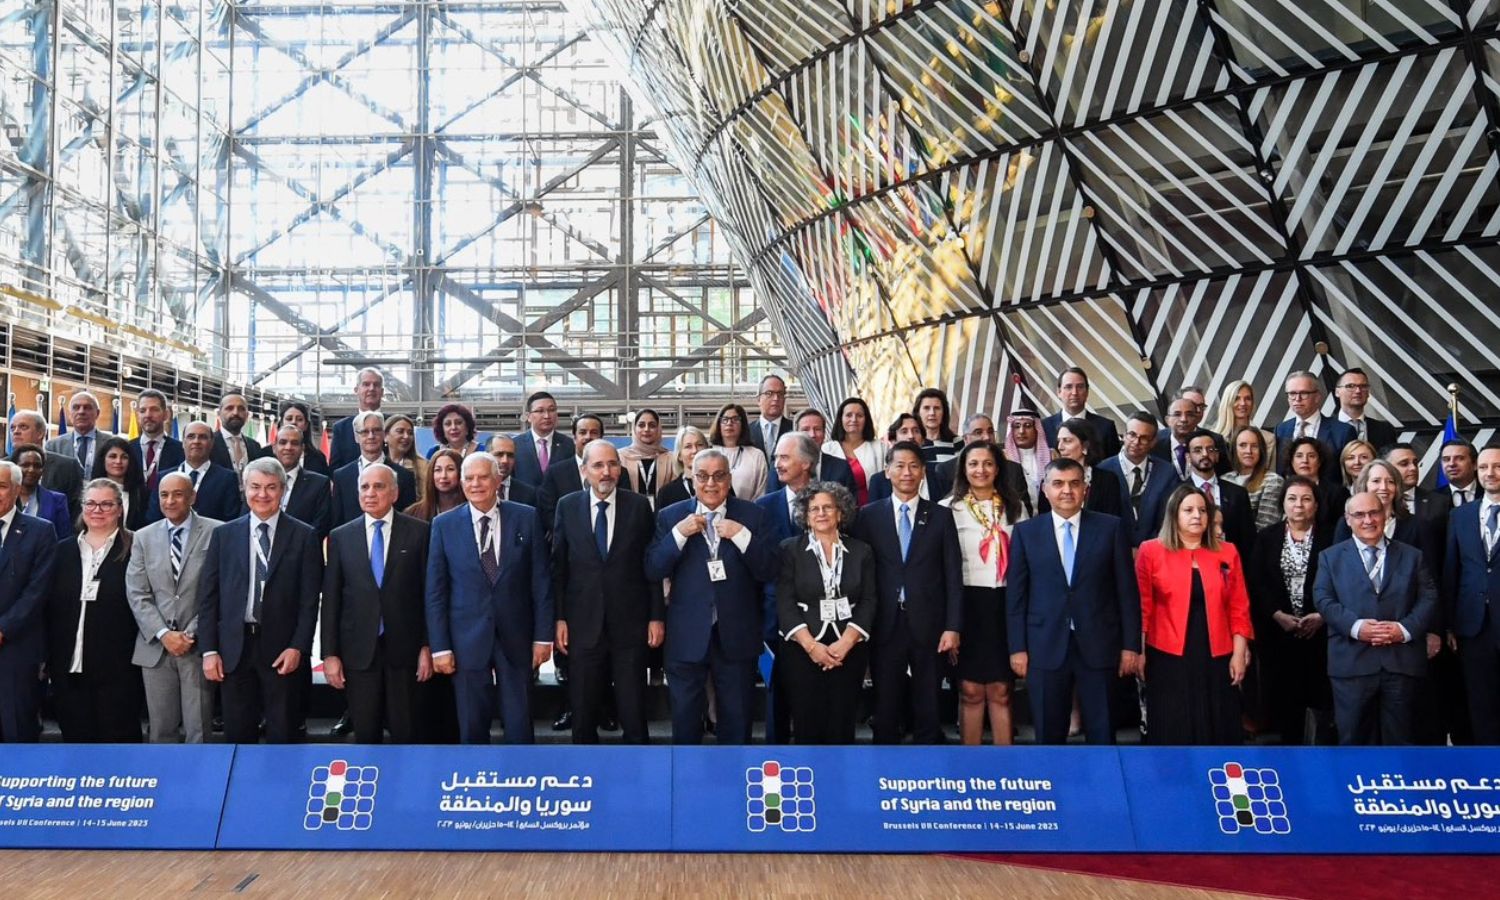 A group photo of representatives of donor countries at the VII Brussels Conference - June 15, 2023 (EU)